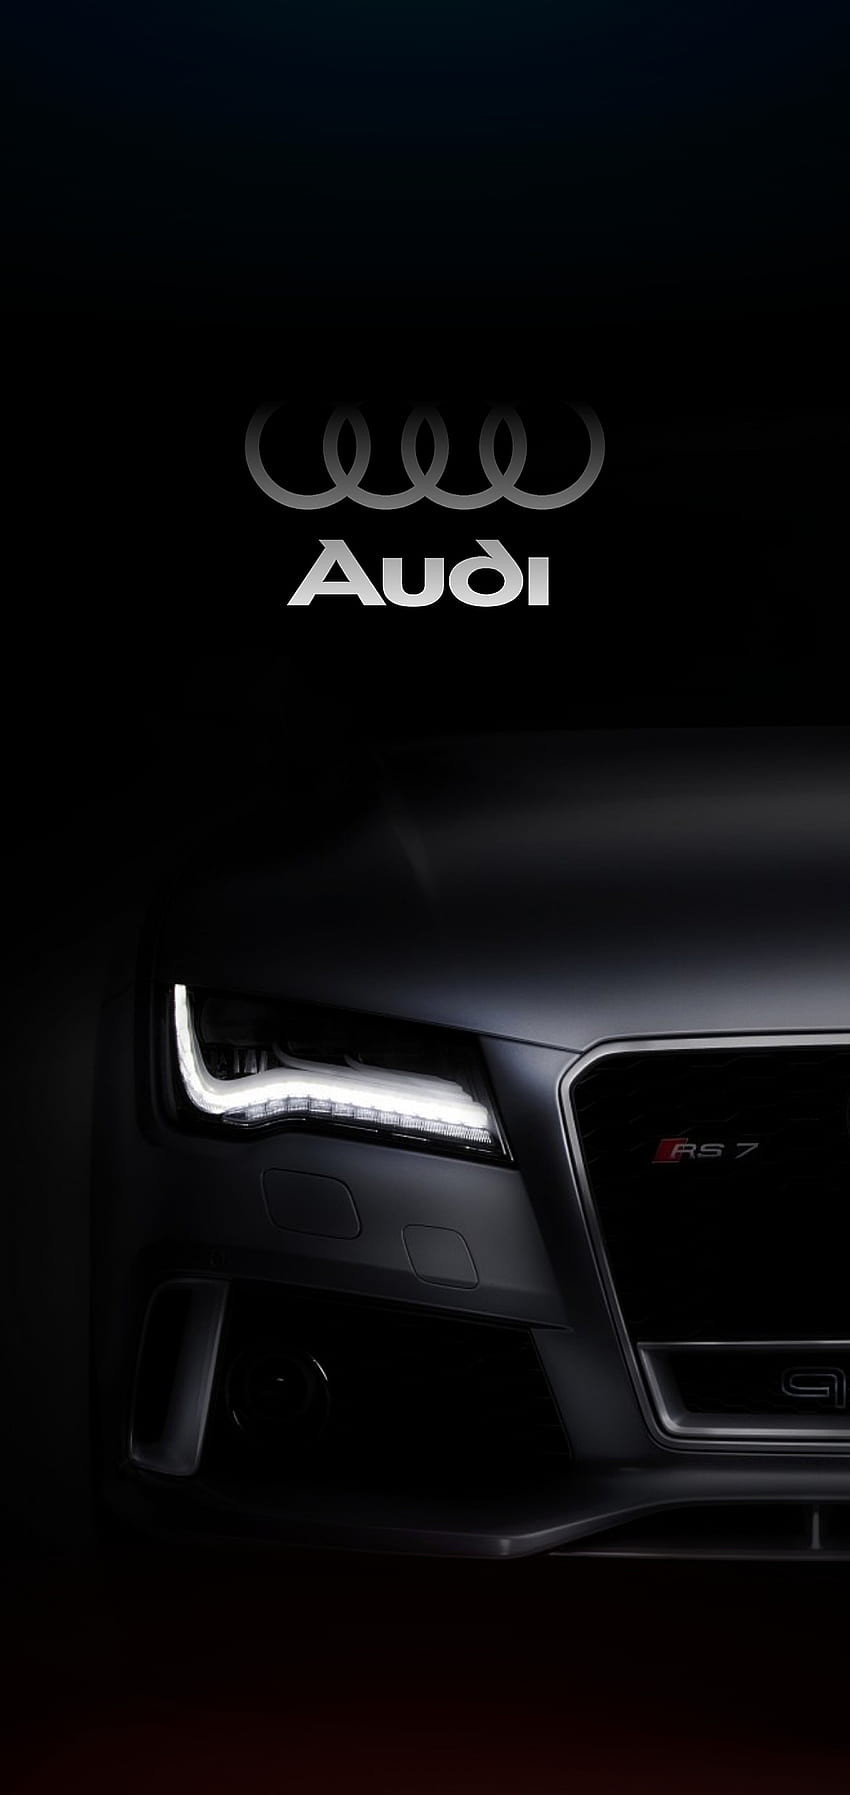 23 Incredible And Fascinating Audi Wallpapers To Check Out | Audi r8  wallpaper, Sports car wallpaper, 4 door sports cars